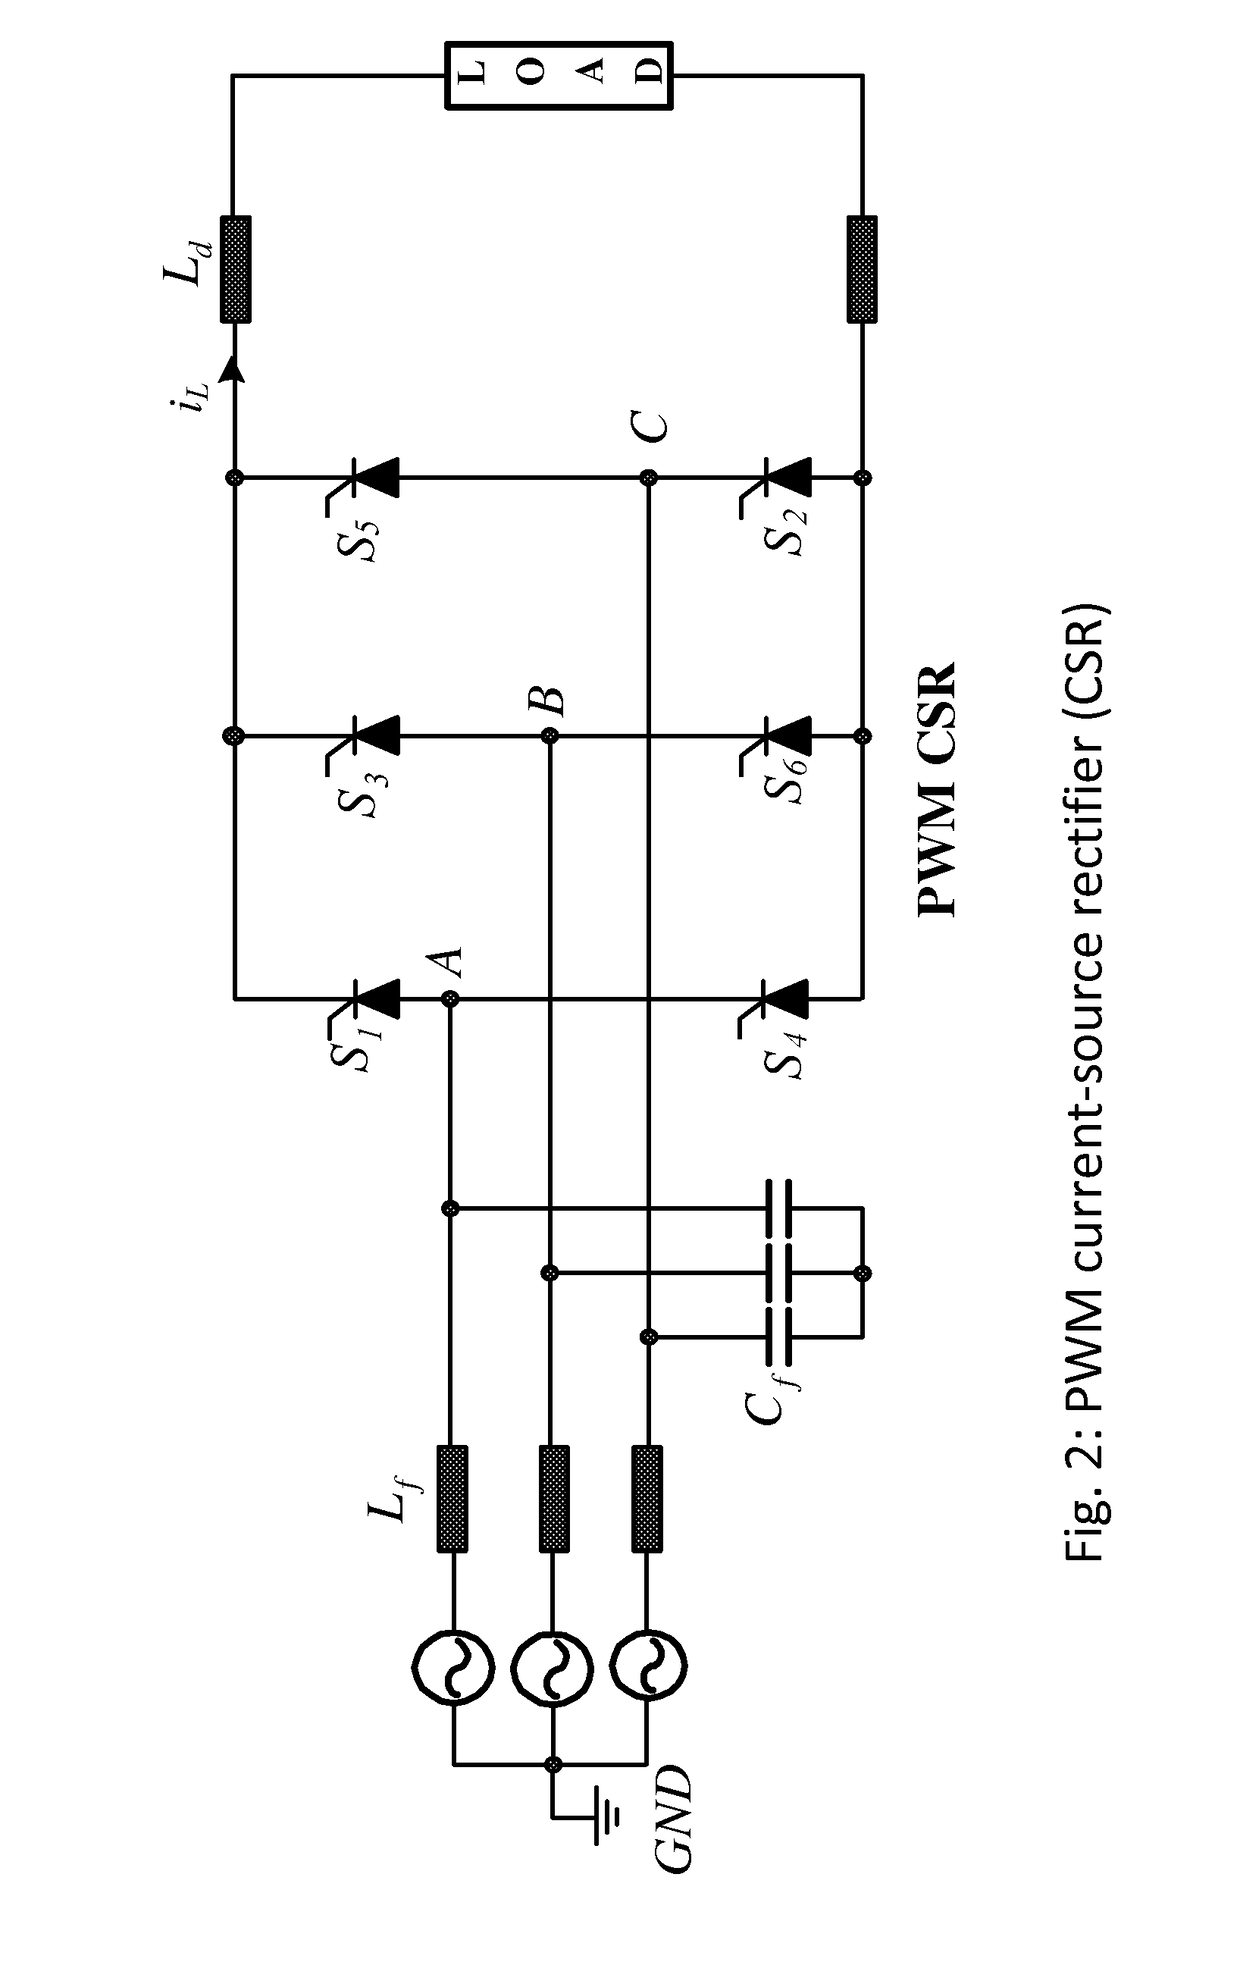 Space vector modulation for matrix converter and current source converter